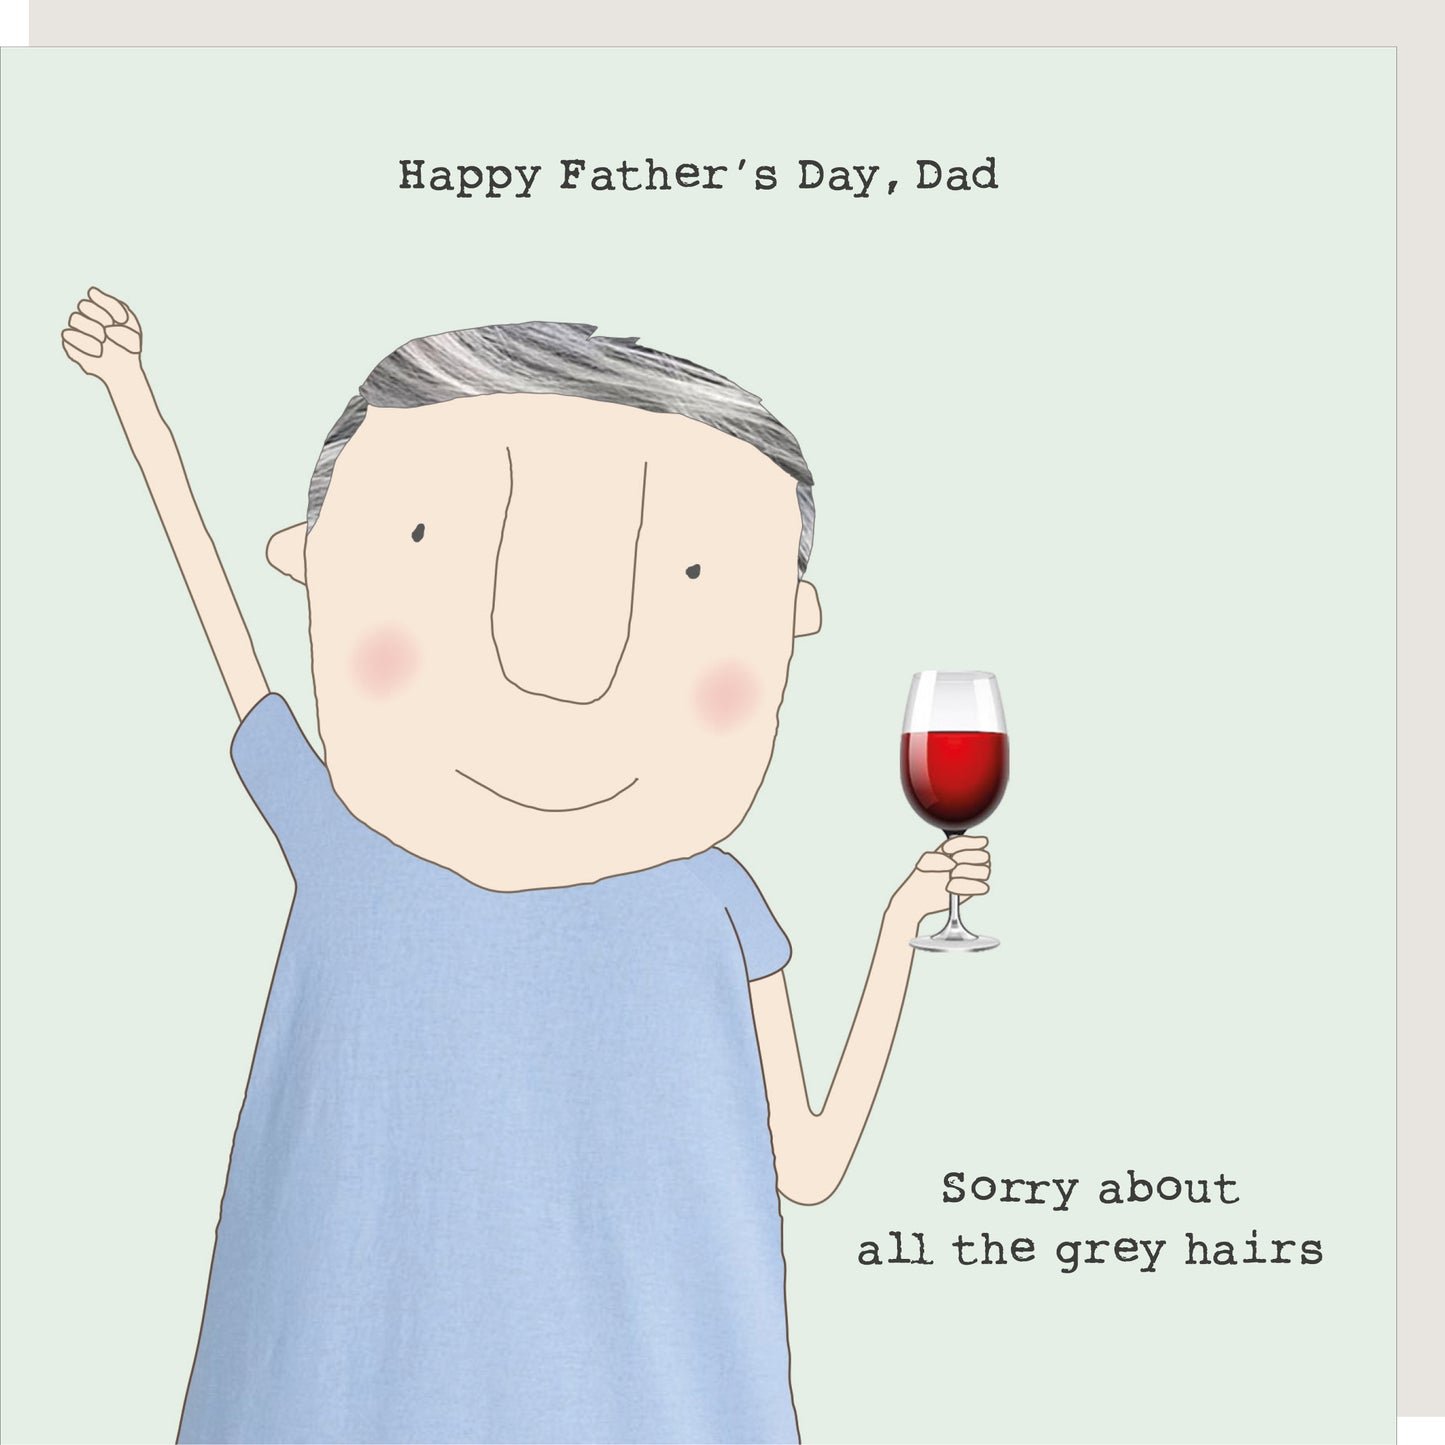 Rosie Made A Thing Grey Hairs Wine Down, Dad! Father's Day Funny Greeting Card